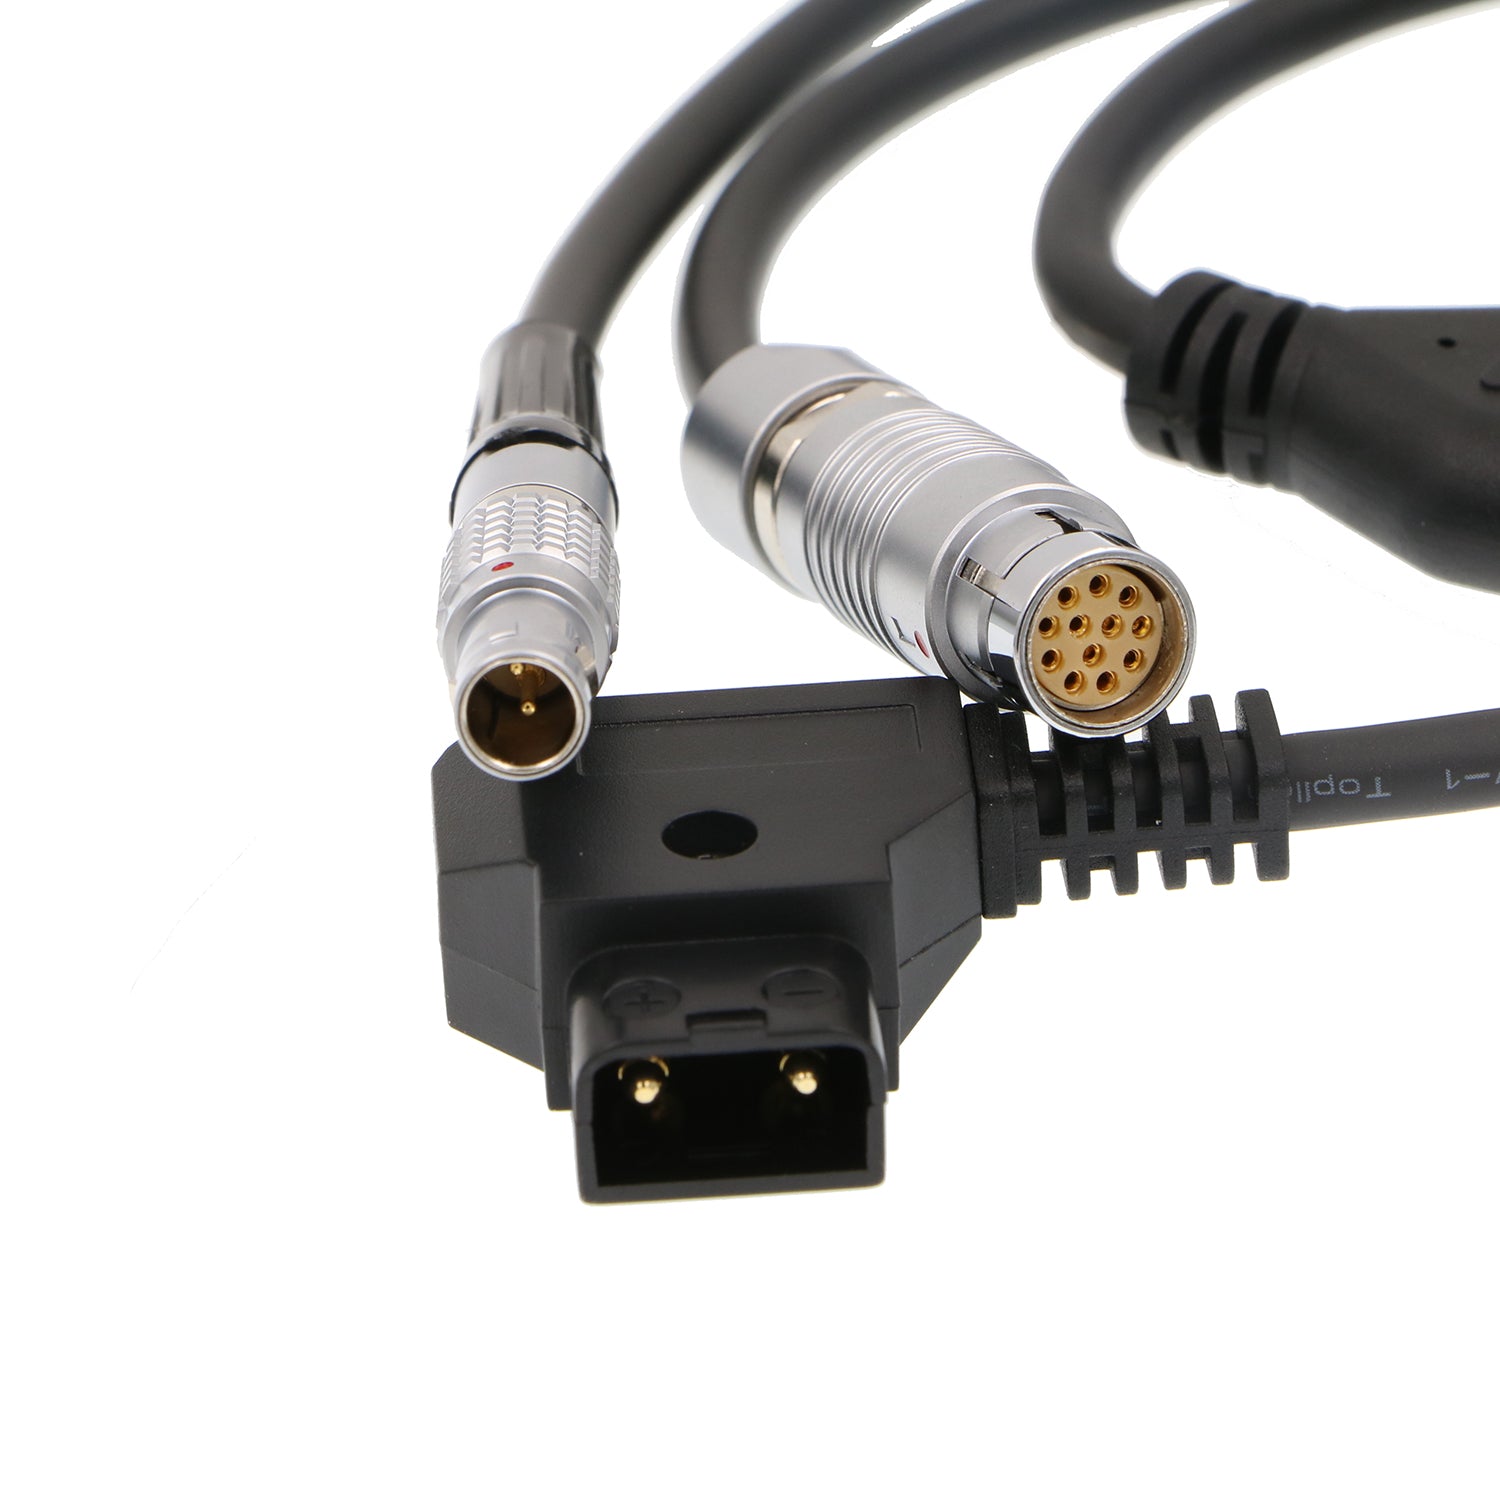 Alvin’s Cables Power Y Cable for Phantom 4k VEO 990 SmallHD D-tap to Fischer 12 Pin Female & 2 Pin Male